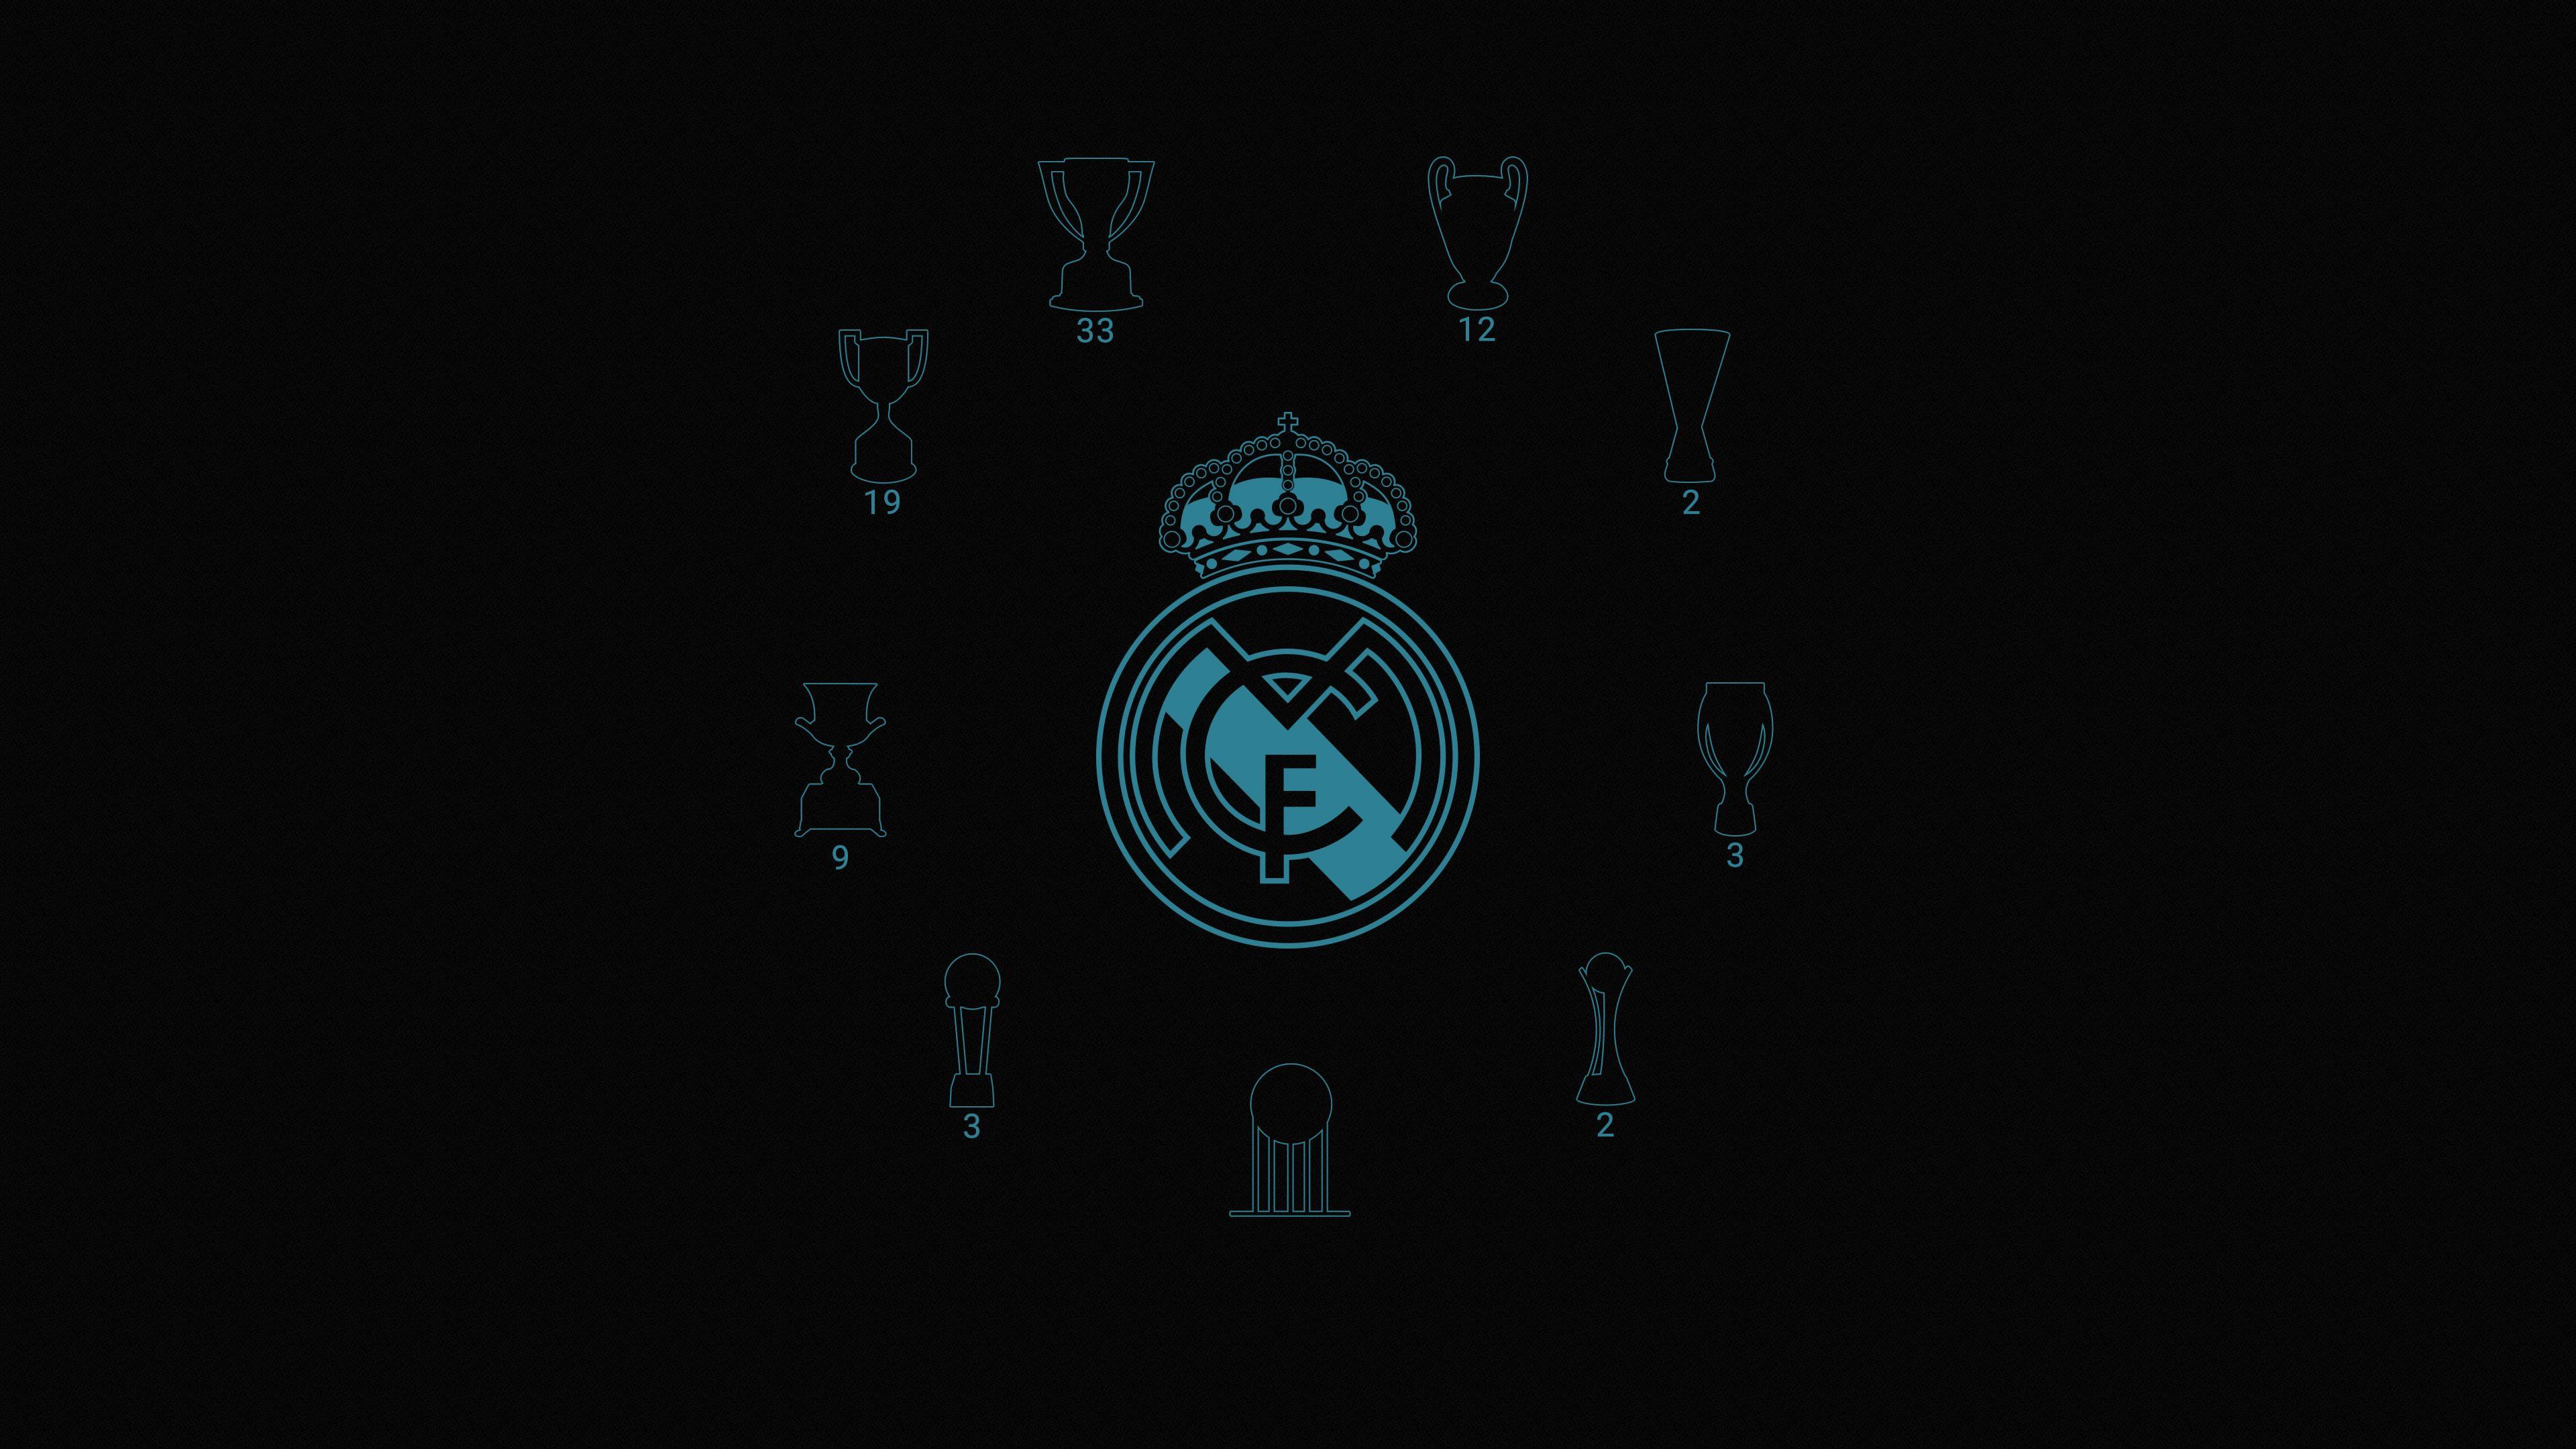 Real Madrid Hd 2018 Wallpapers Wallpaper Cave